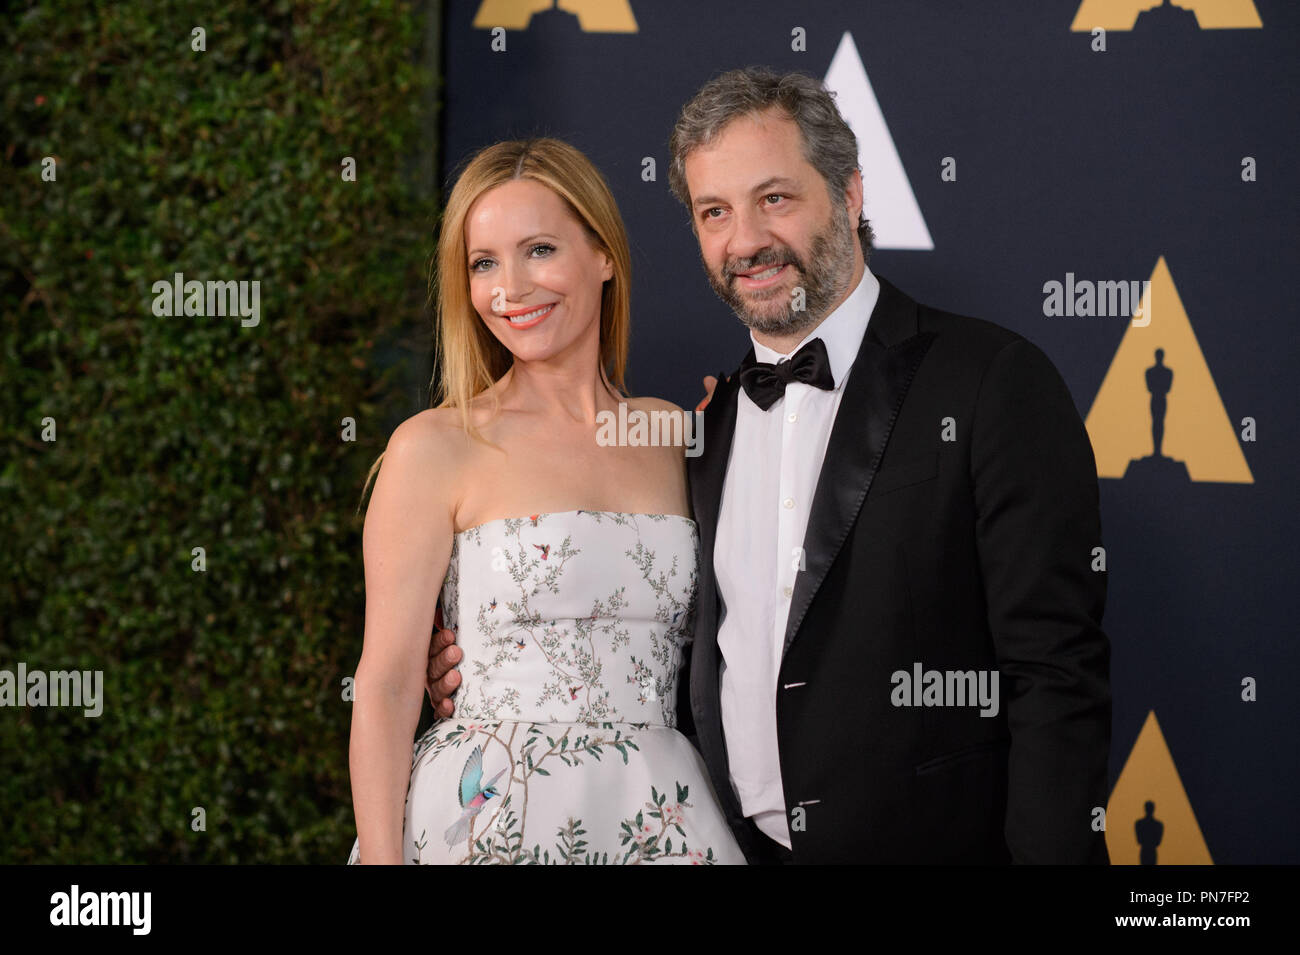 Leslie Mann (left) and Judd Apatow attend the Academy’s 8th Annual Governors Awards in The Ray Dolby Ballroom at Hollywood & Highland Center® in Hollywood, CA, on Saturday, November 12, 2016.  File Reference # 33153 055THA  For Editorial Use Only -  All Rights Reserved Stock Photo